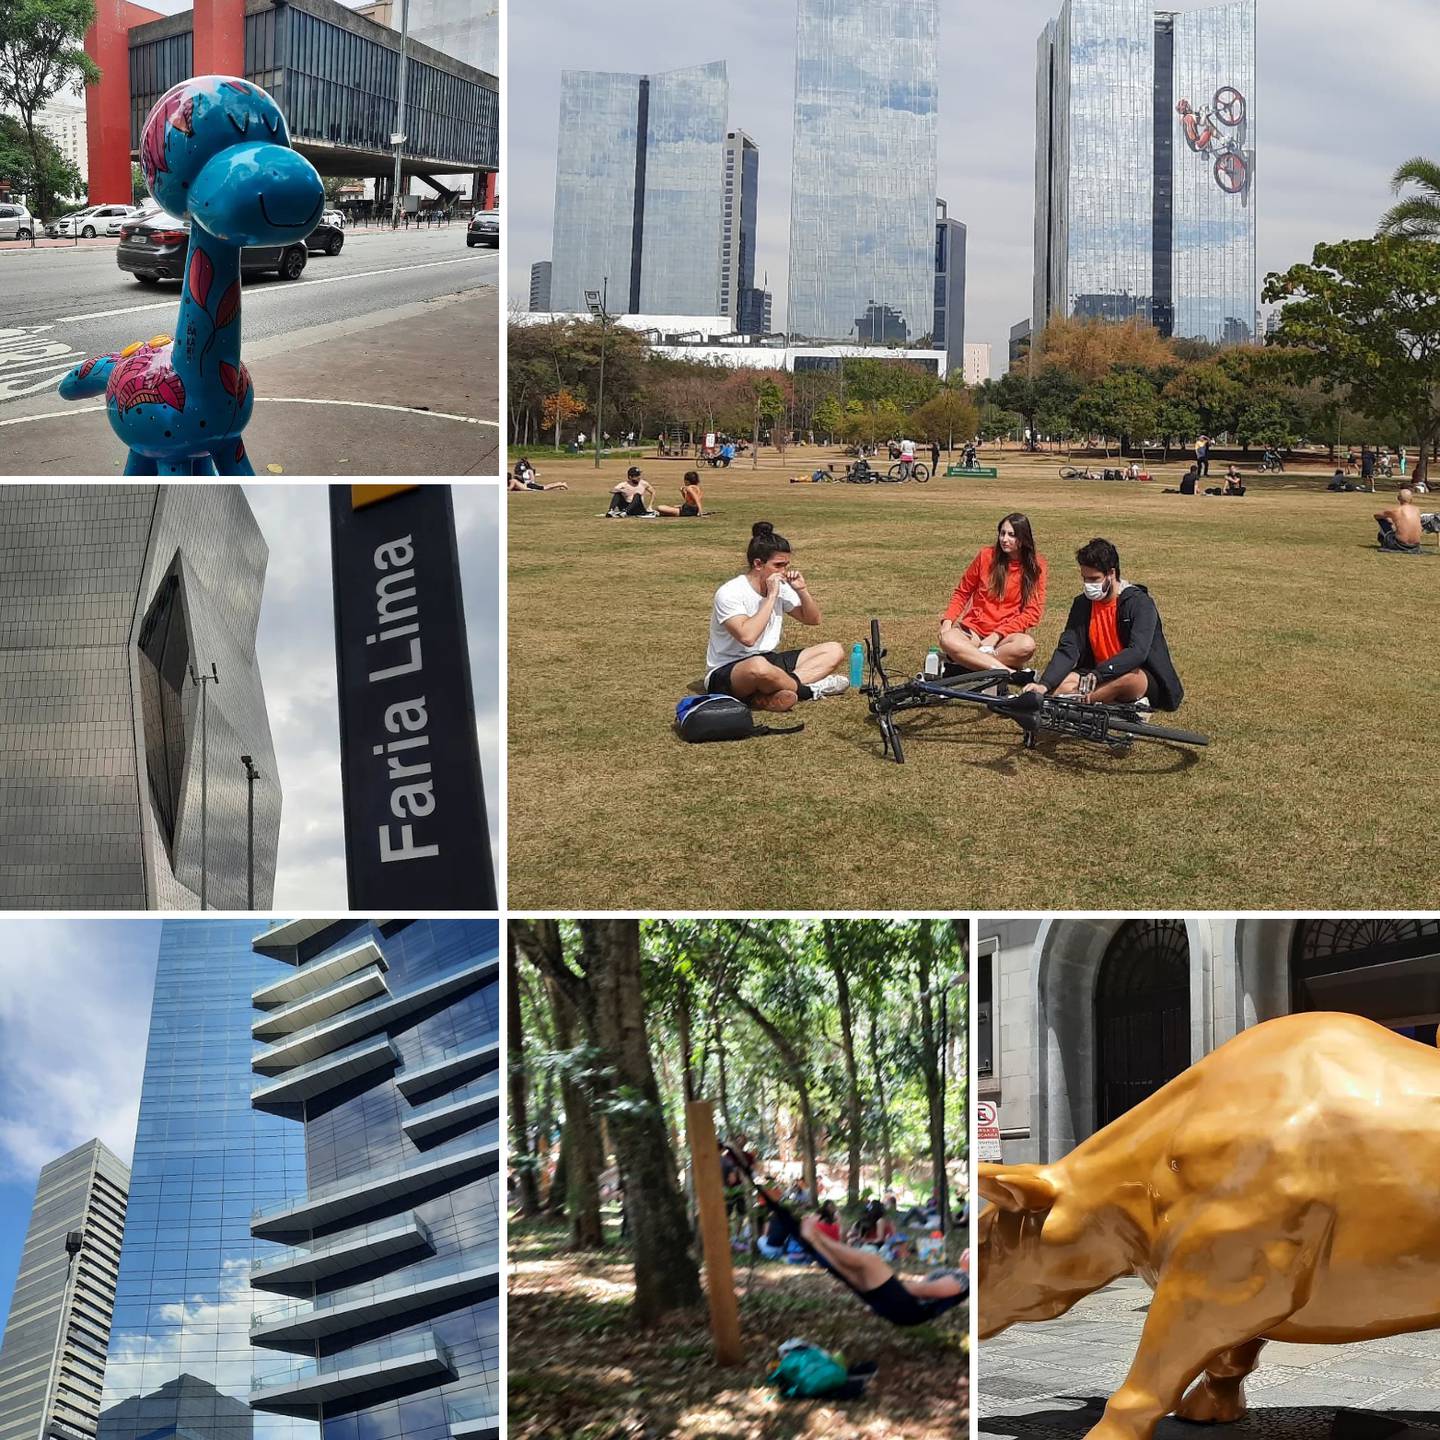 The city of São Paulo accelerates growth in the tourism sector and presents new landscapes and urban attractionsdfd